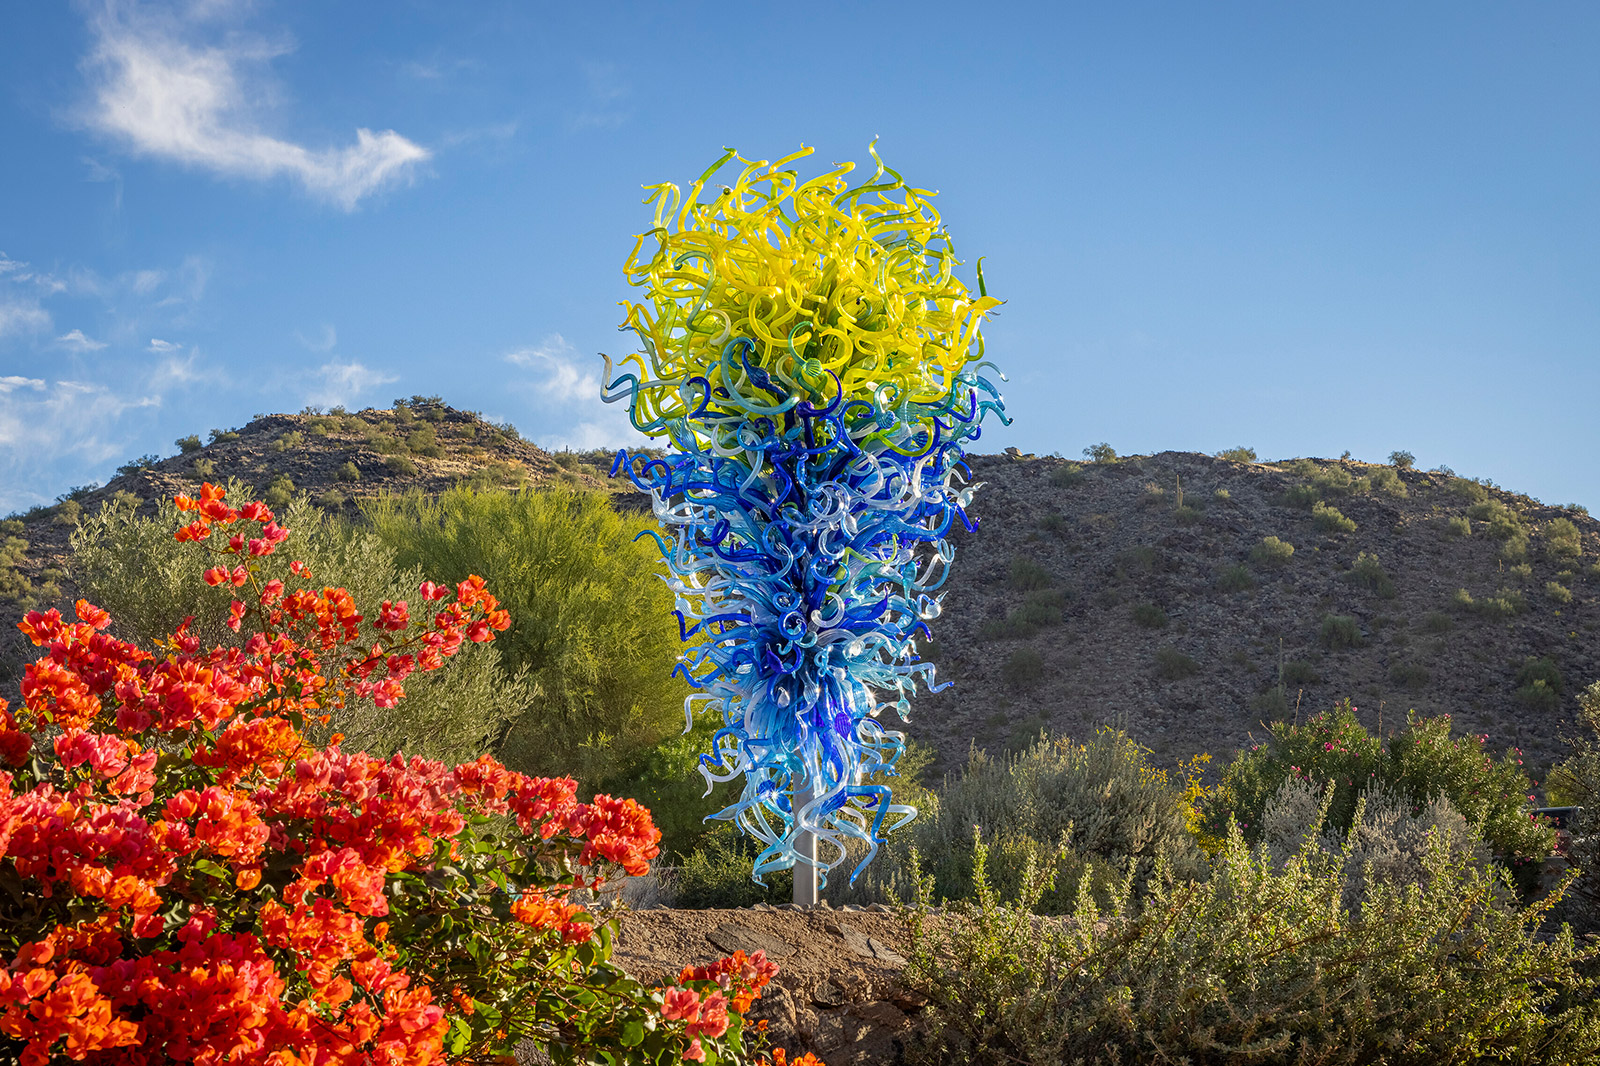 Marine Blue and Citron Tower, 2021, Dale Chihuly